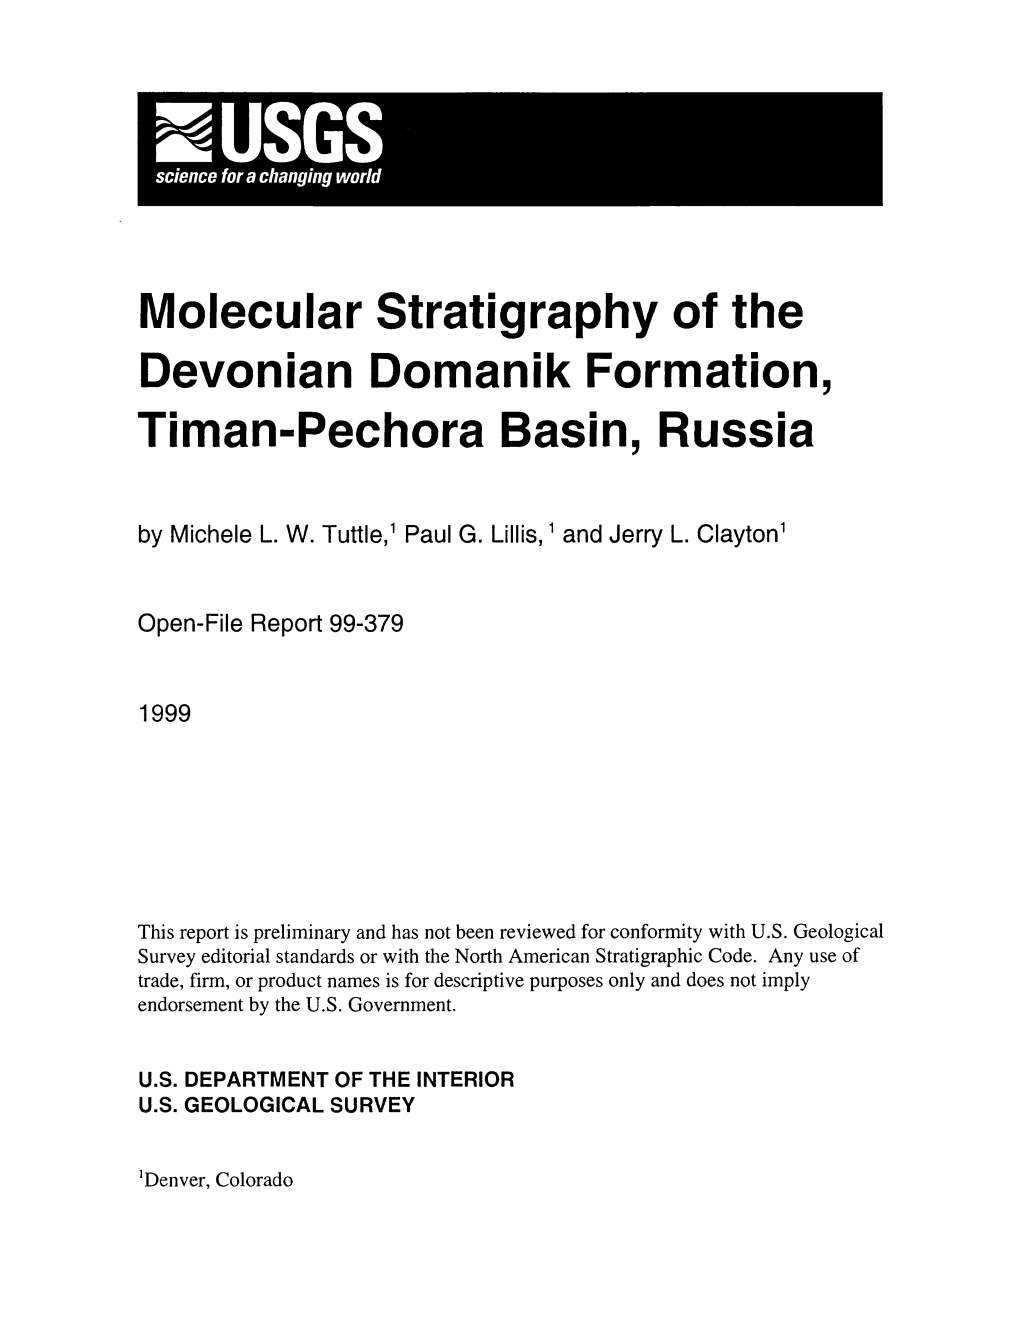 Molecular Stratigraphy of the Devonian Domanik Formation, Timan-Pechora Basin, by Michele L